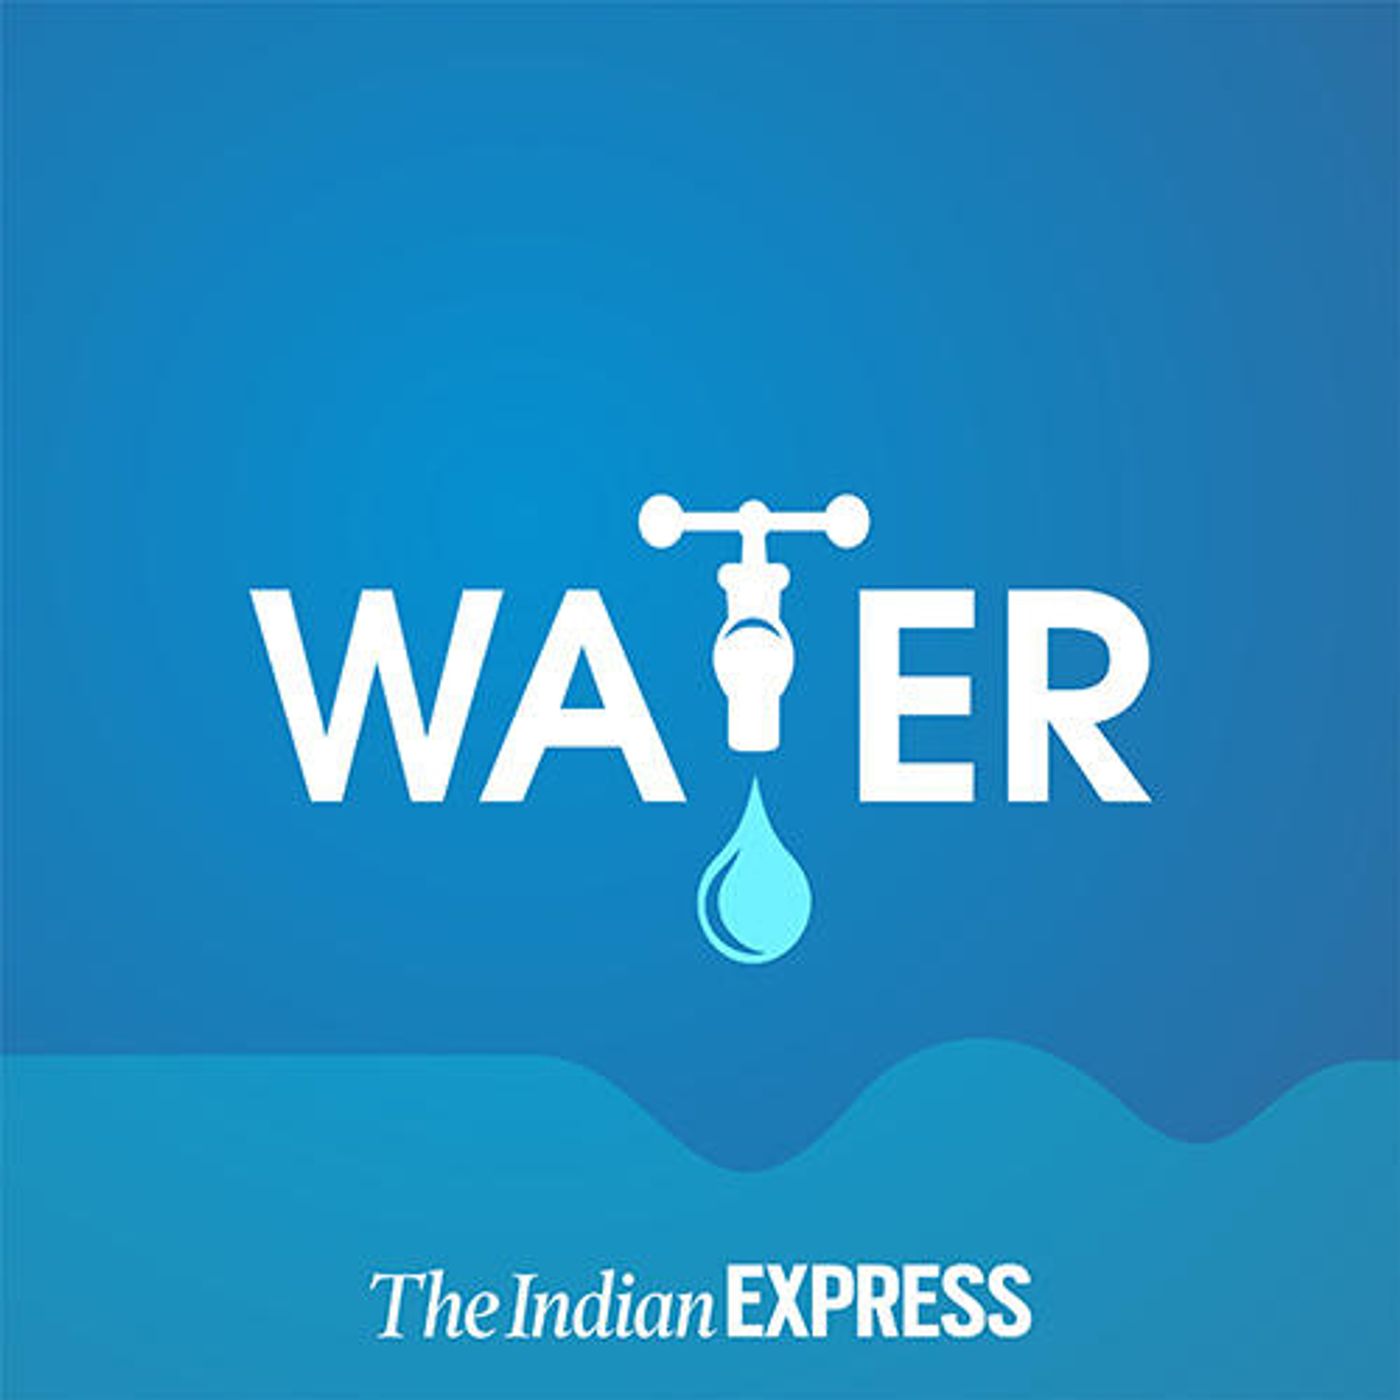 1: Welcome to Water: An Indian Express Series